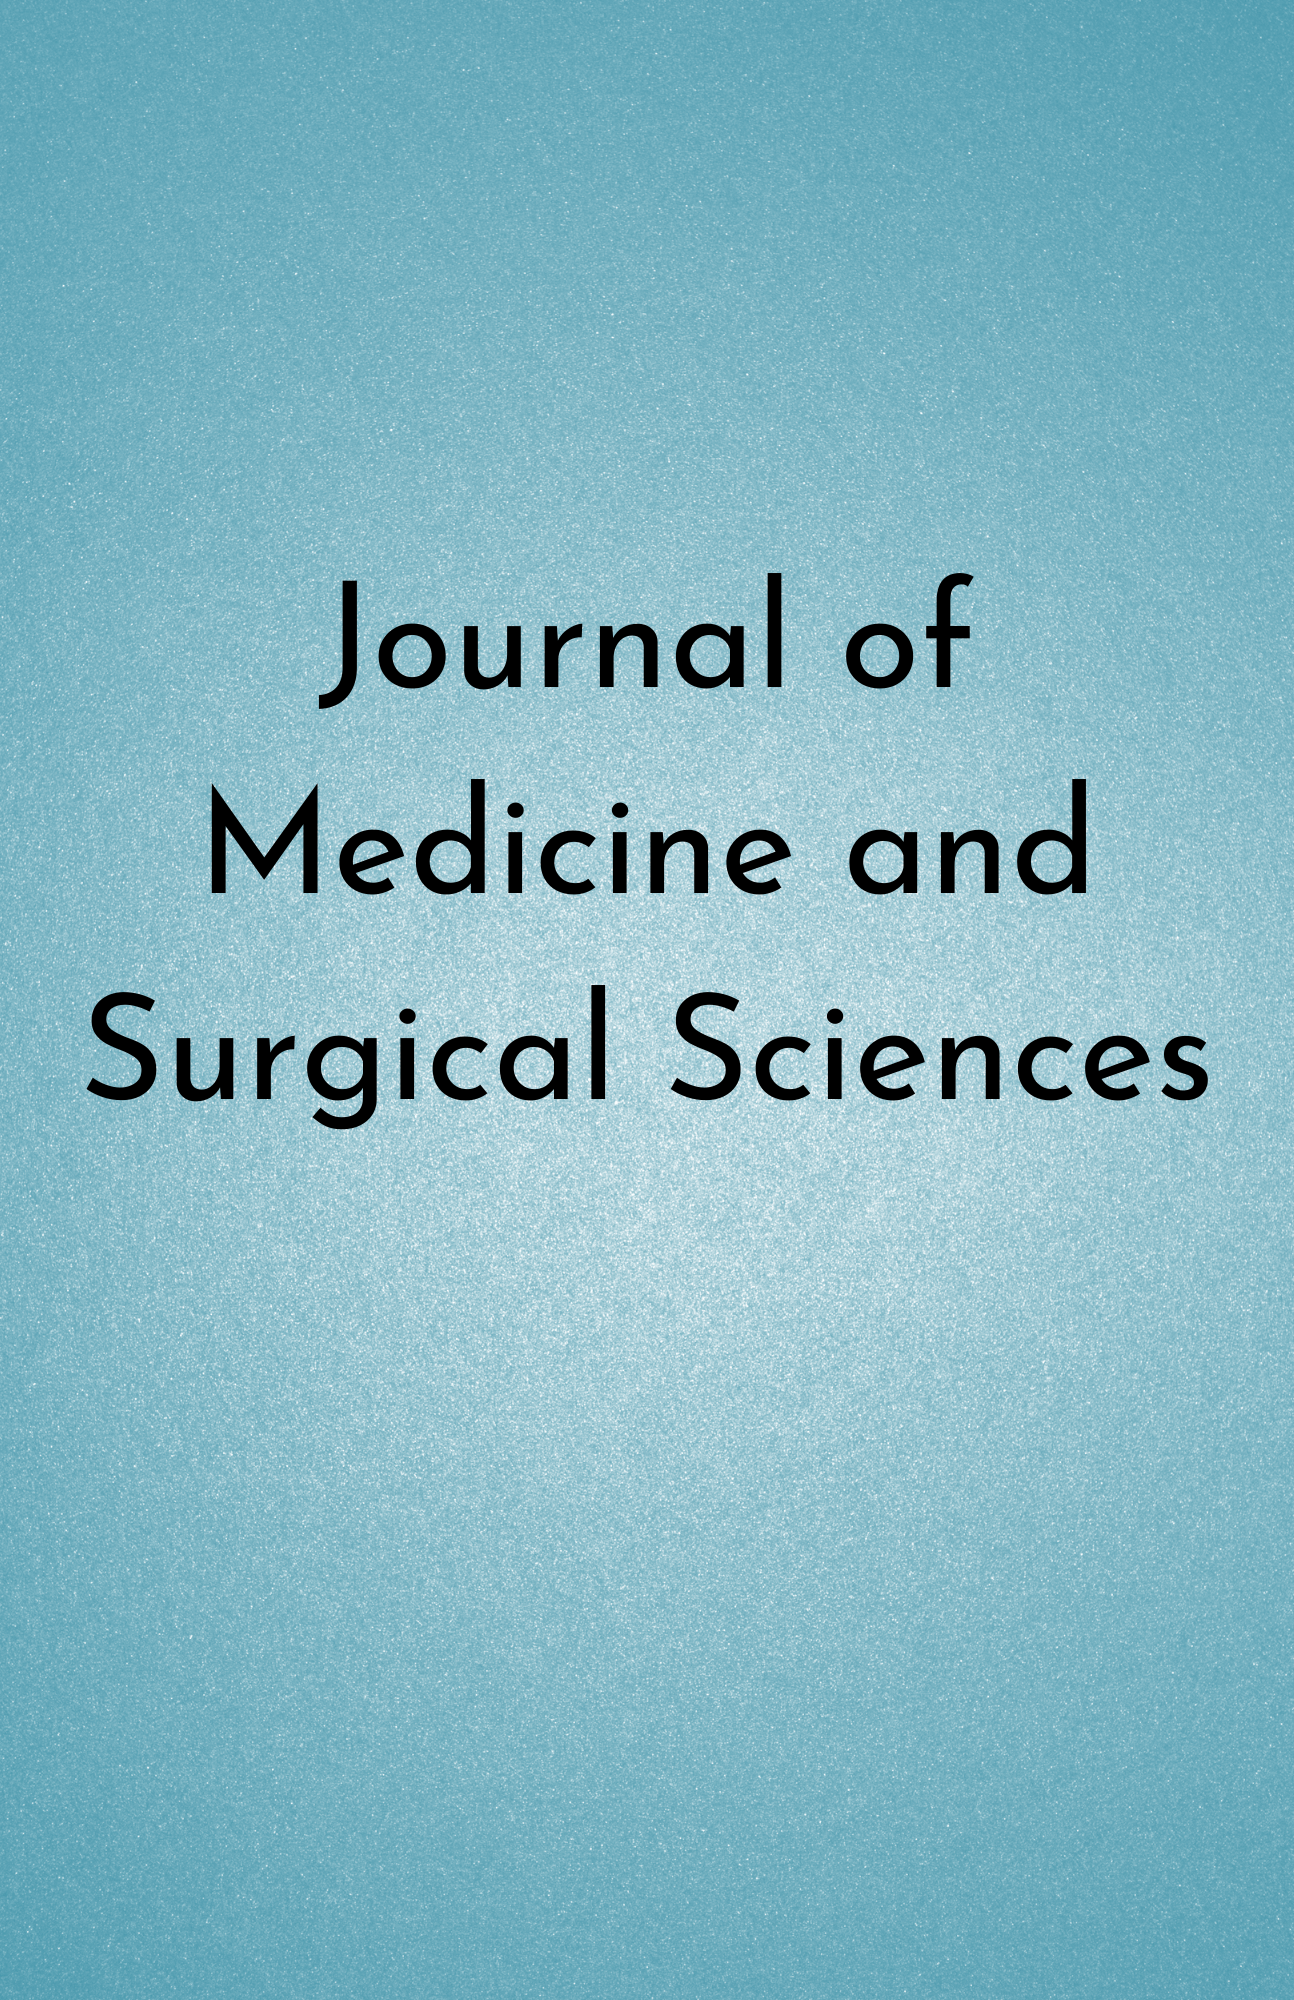 Journal of Medicine and Surgical Sciences